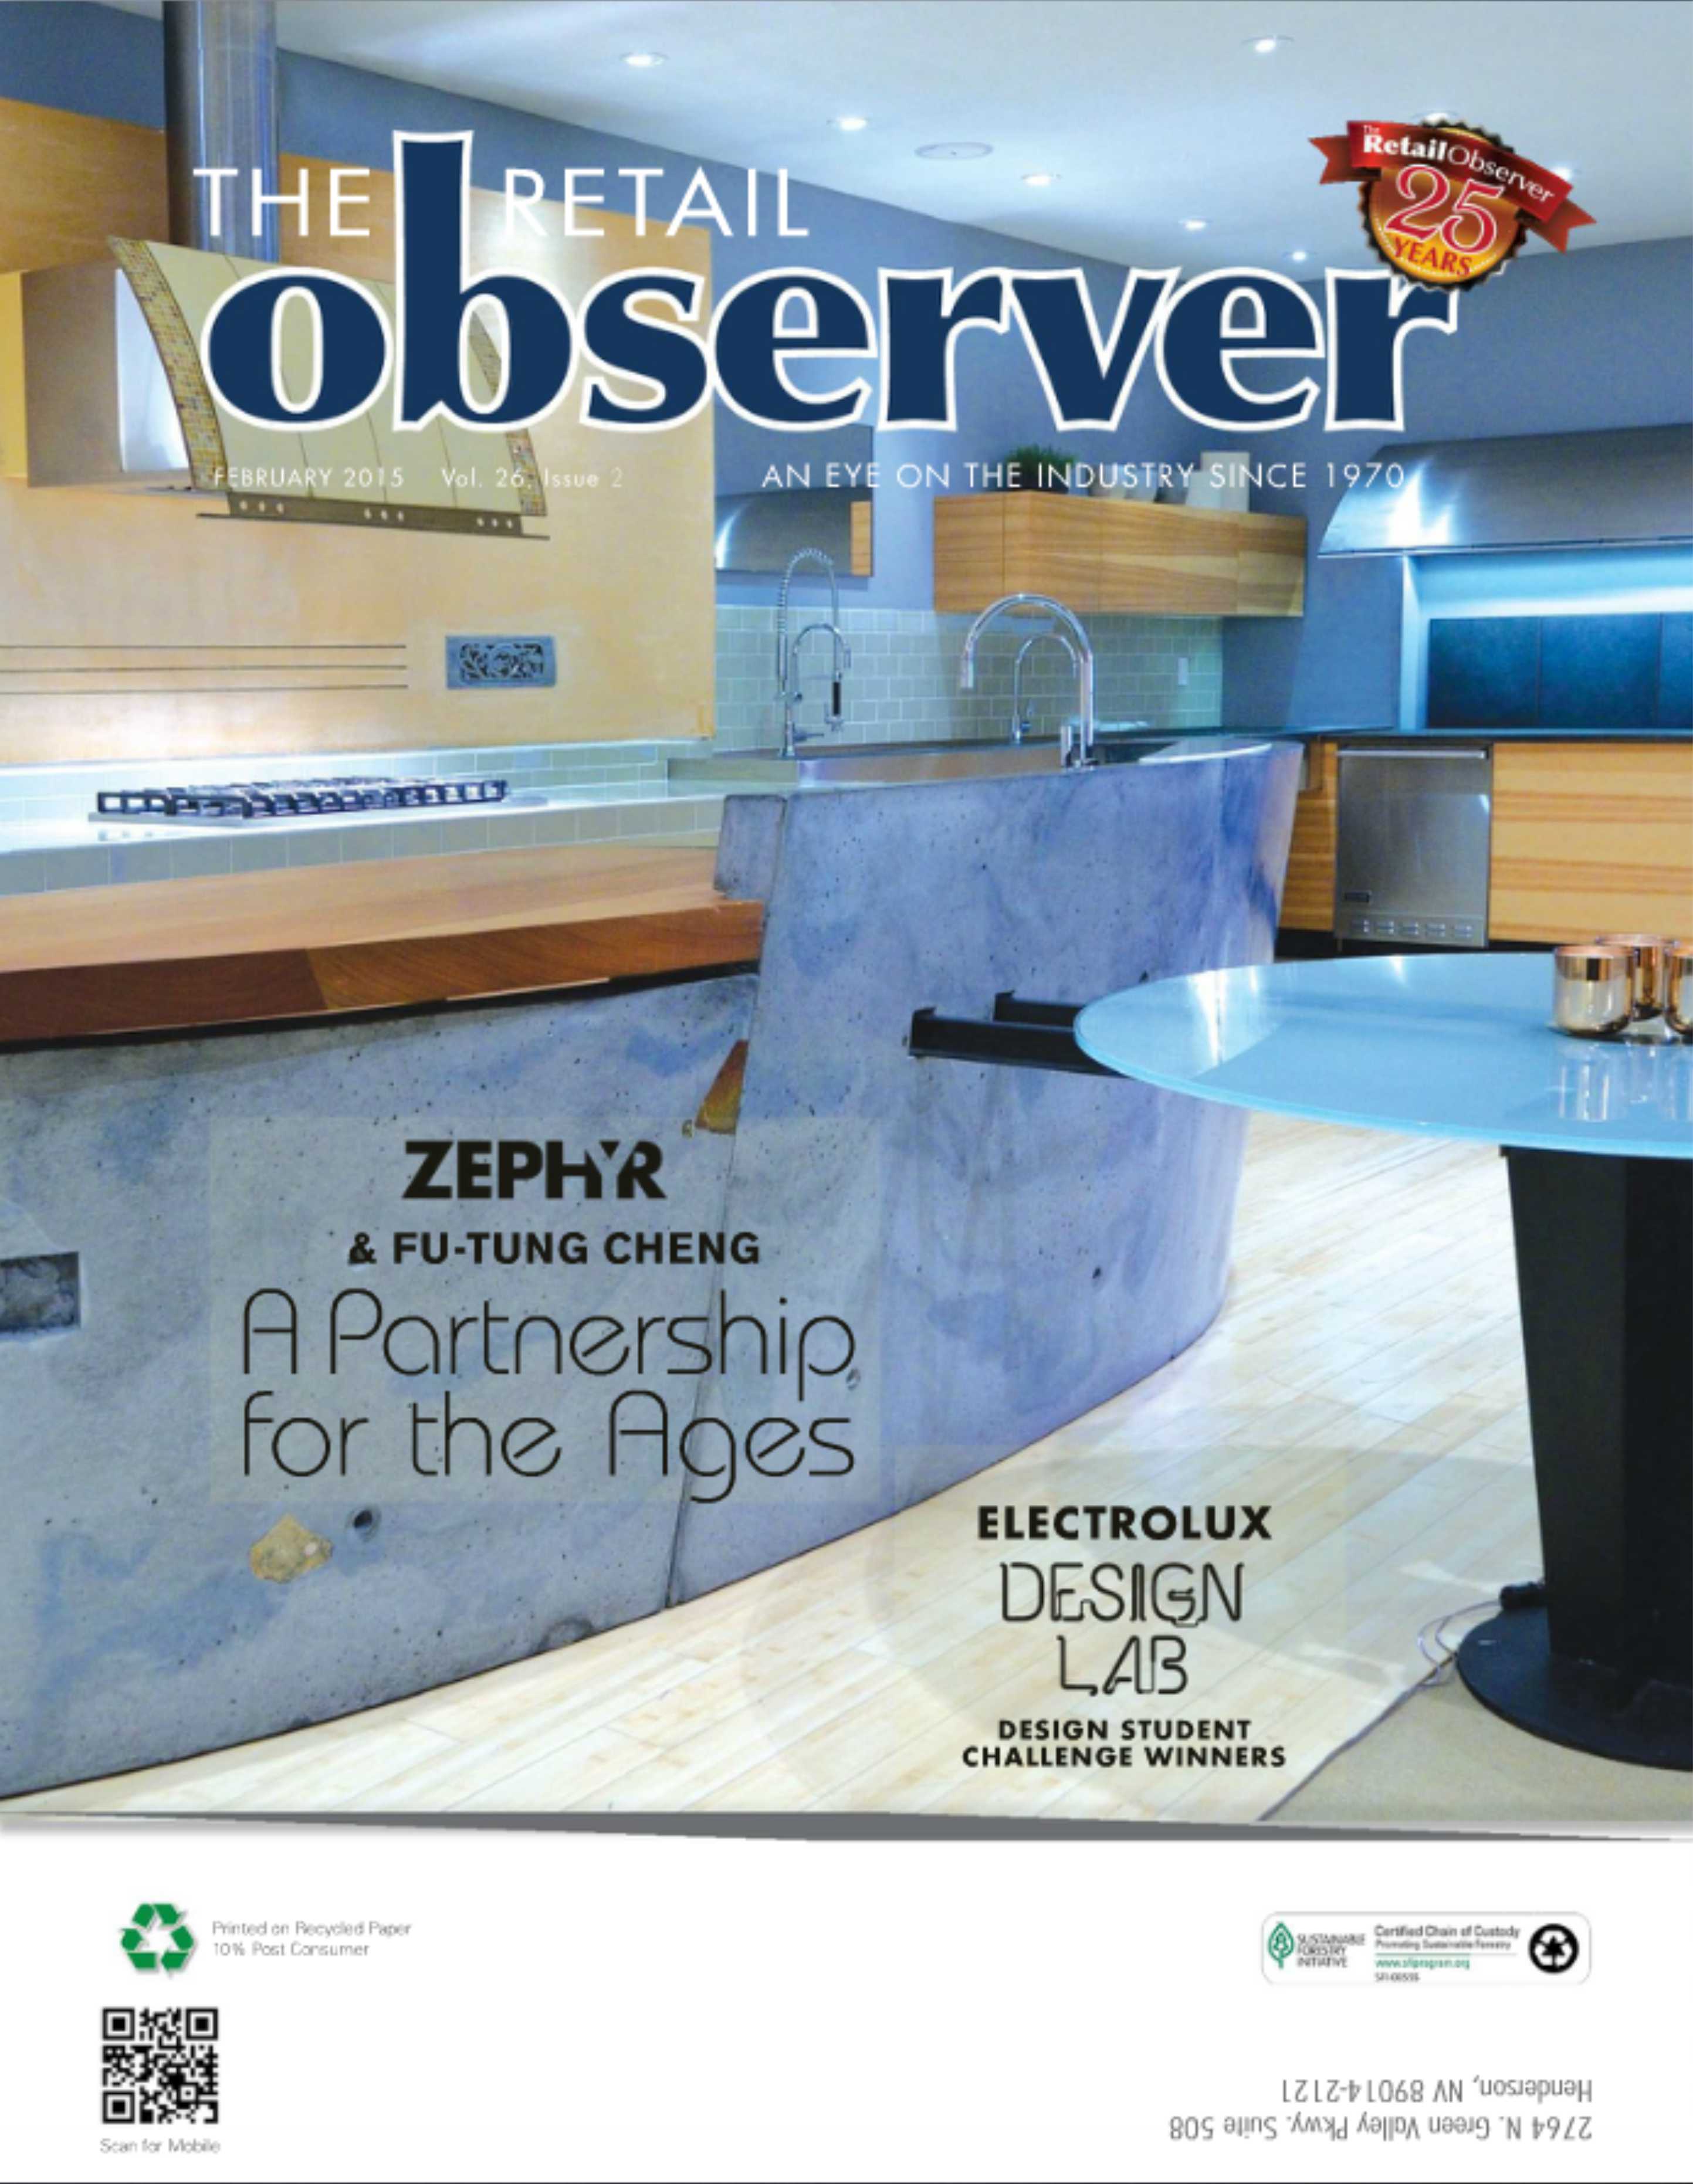 The Retail Observer | A Partnership for the Ages: Zephyr Ventilation and Fu-Tung Cheng look back – featuring CHENG Design